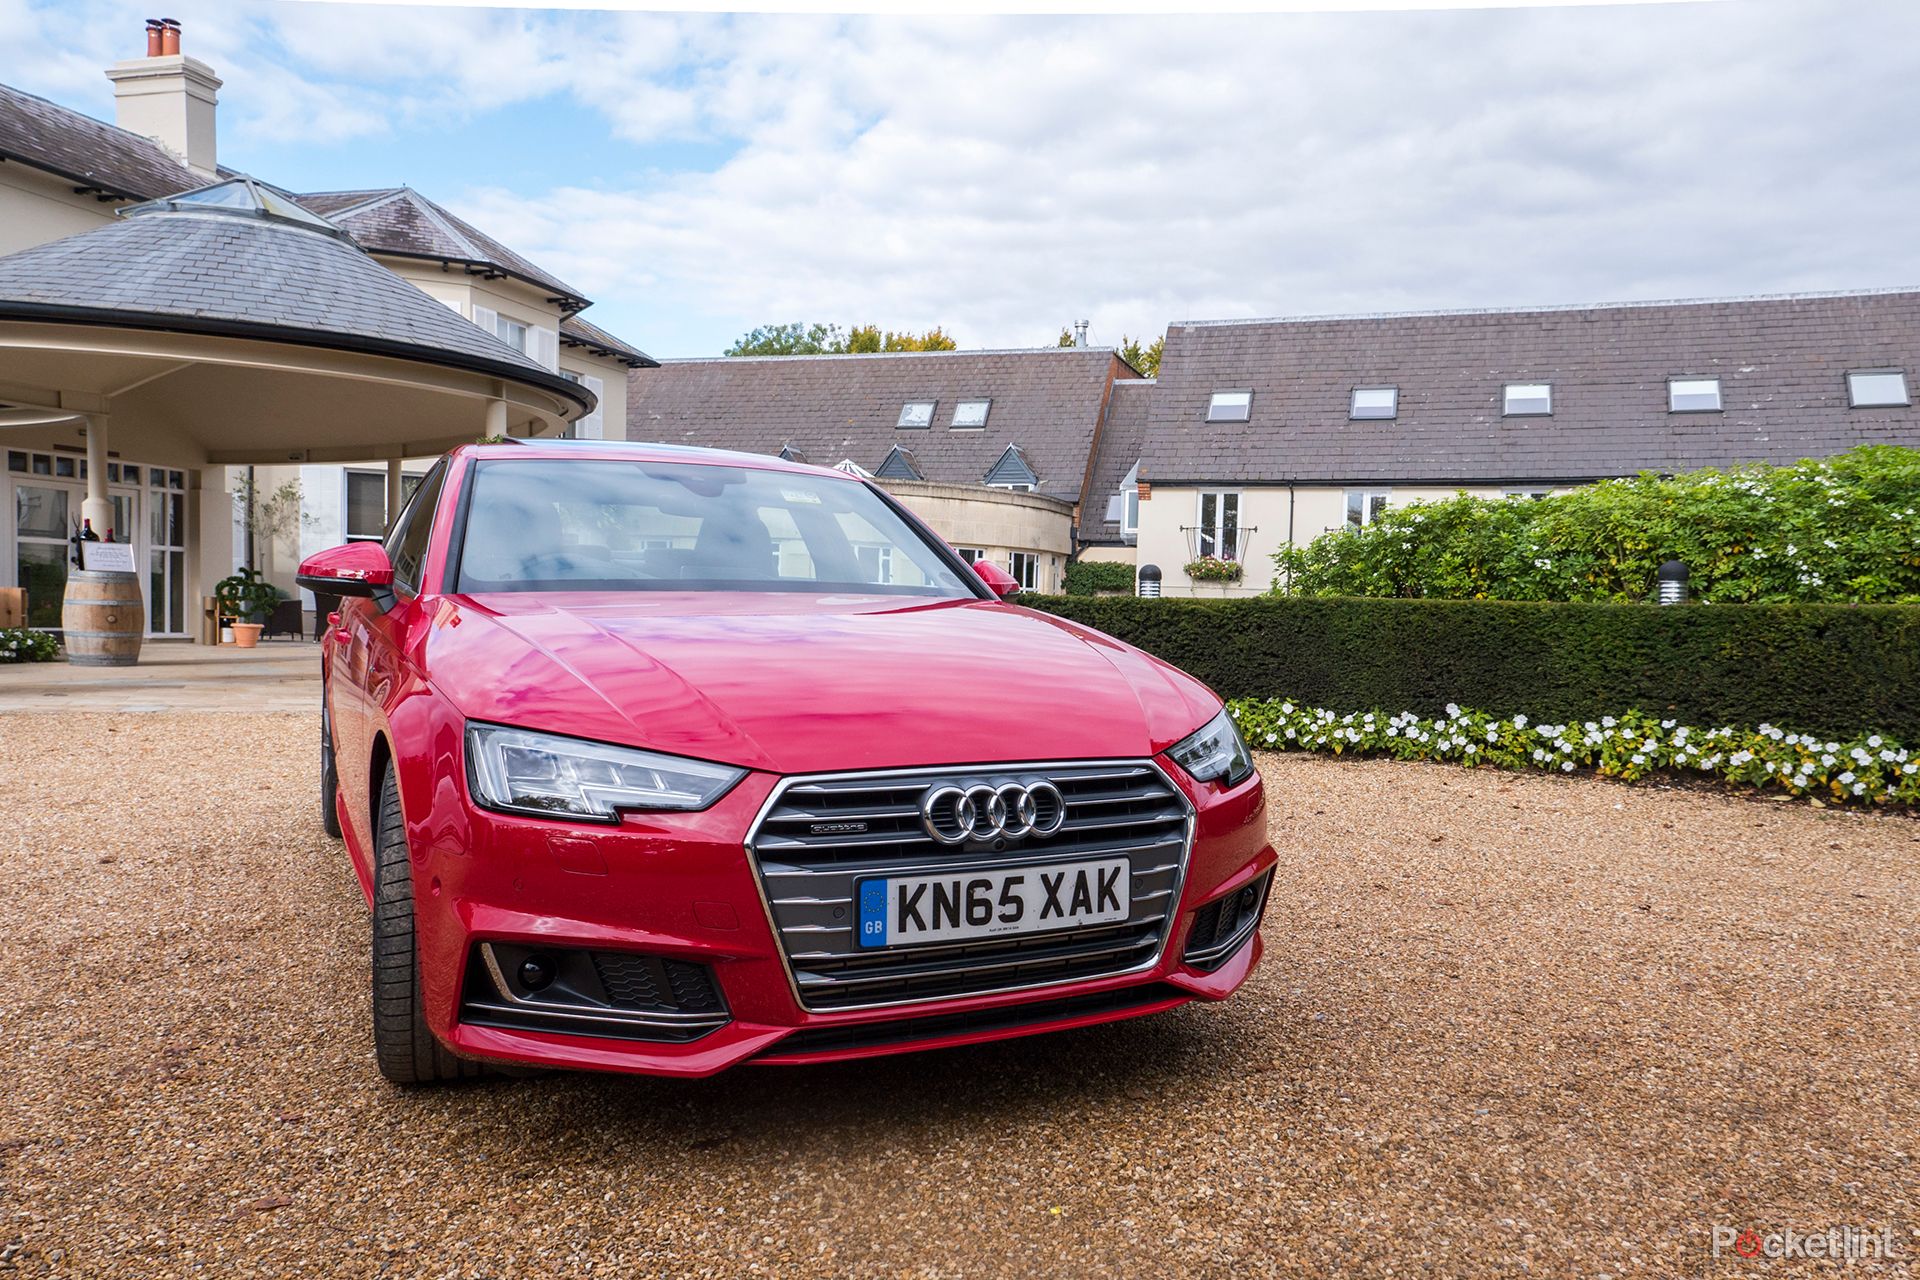 Audi A4 (2016) first drive: All about the extras